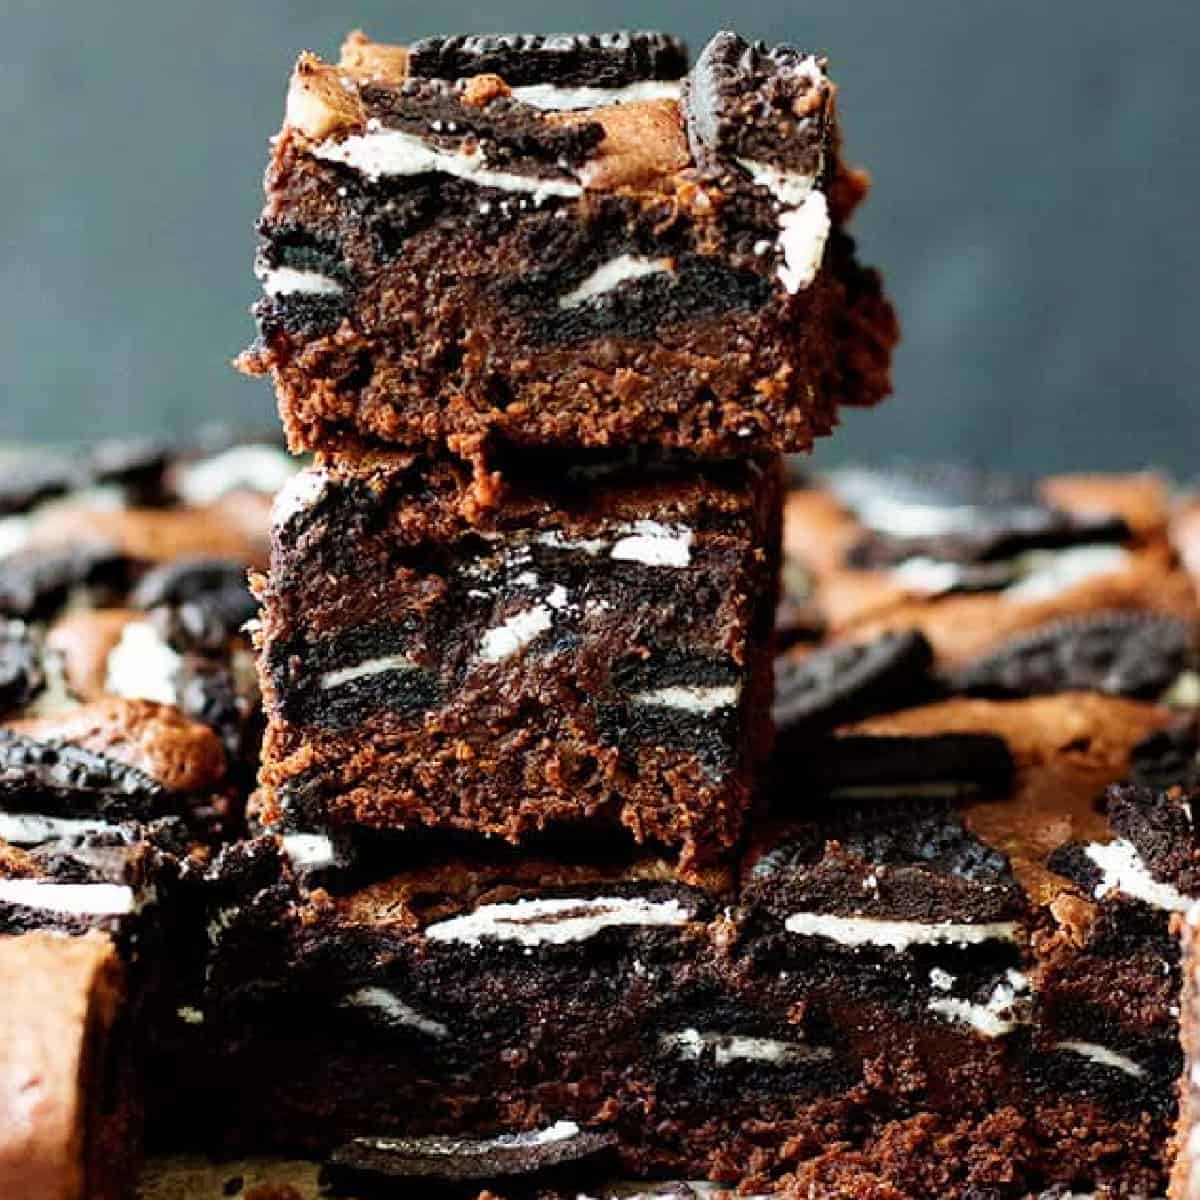 This is the one and only Oreo brownies recipe you'll ever need. Fudgy brownies stuffed and topped with Oreos are so good, you won't be able to stop eating!
